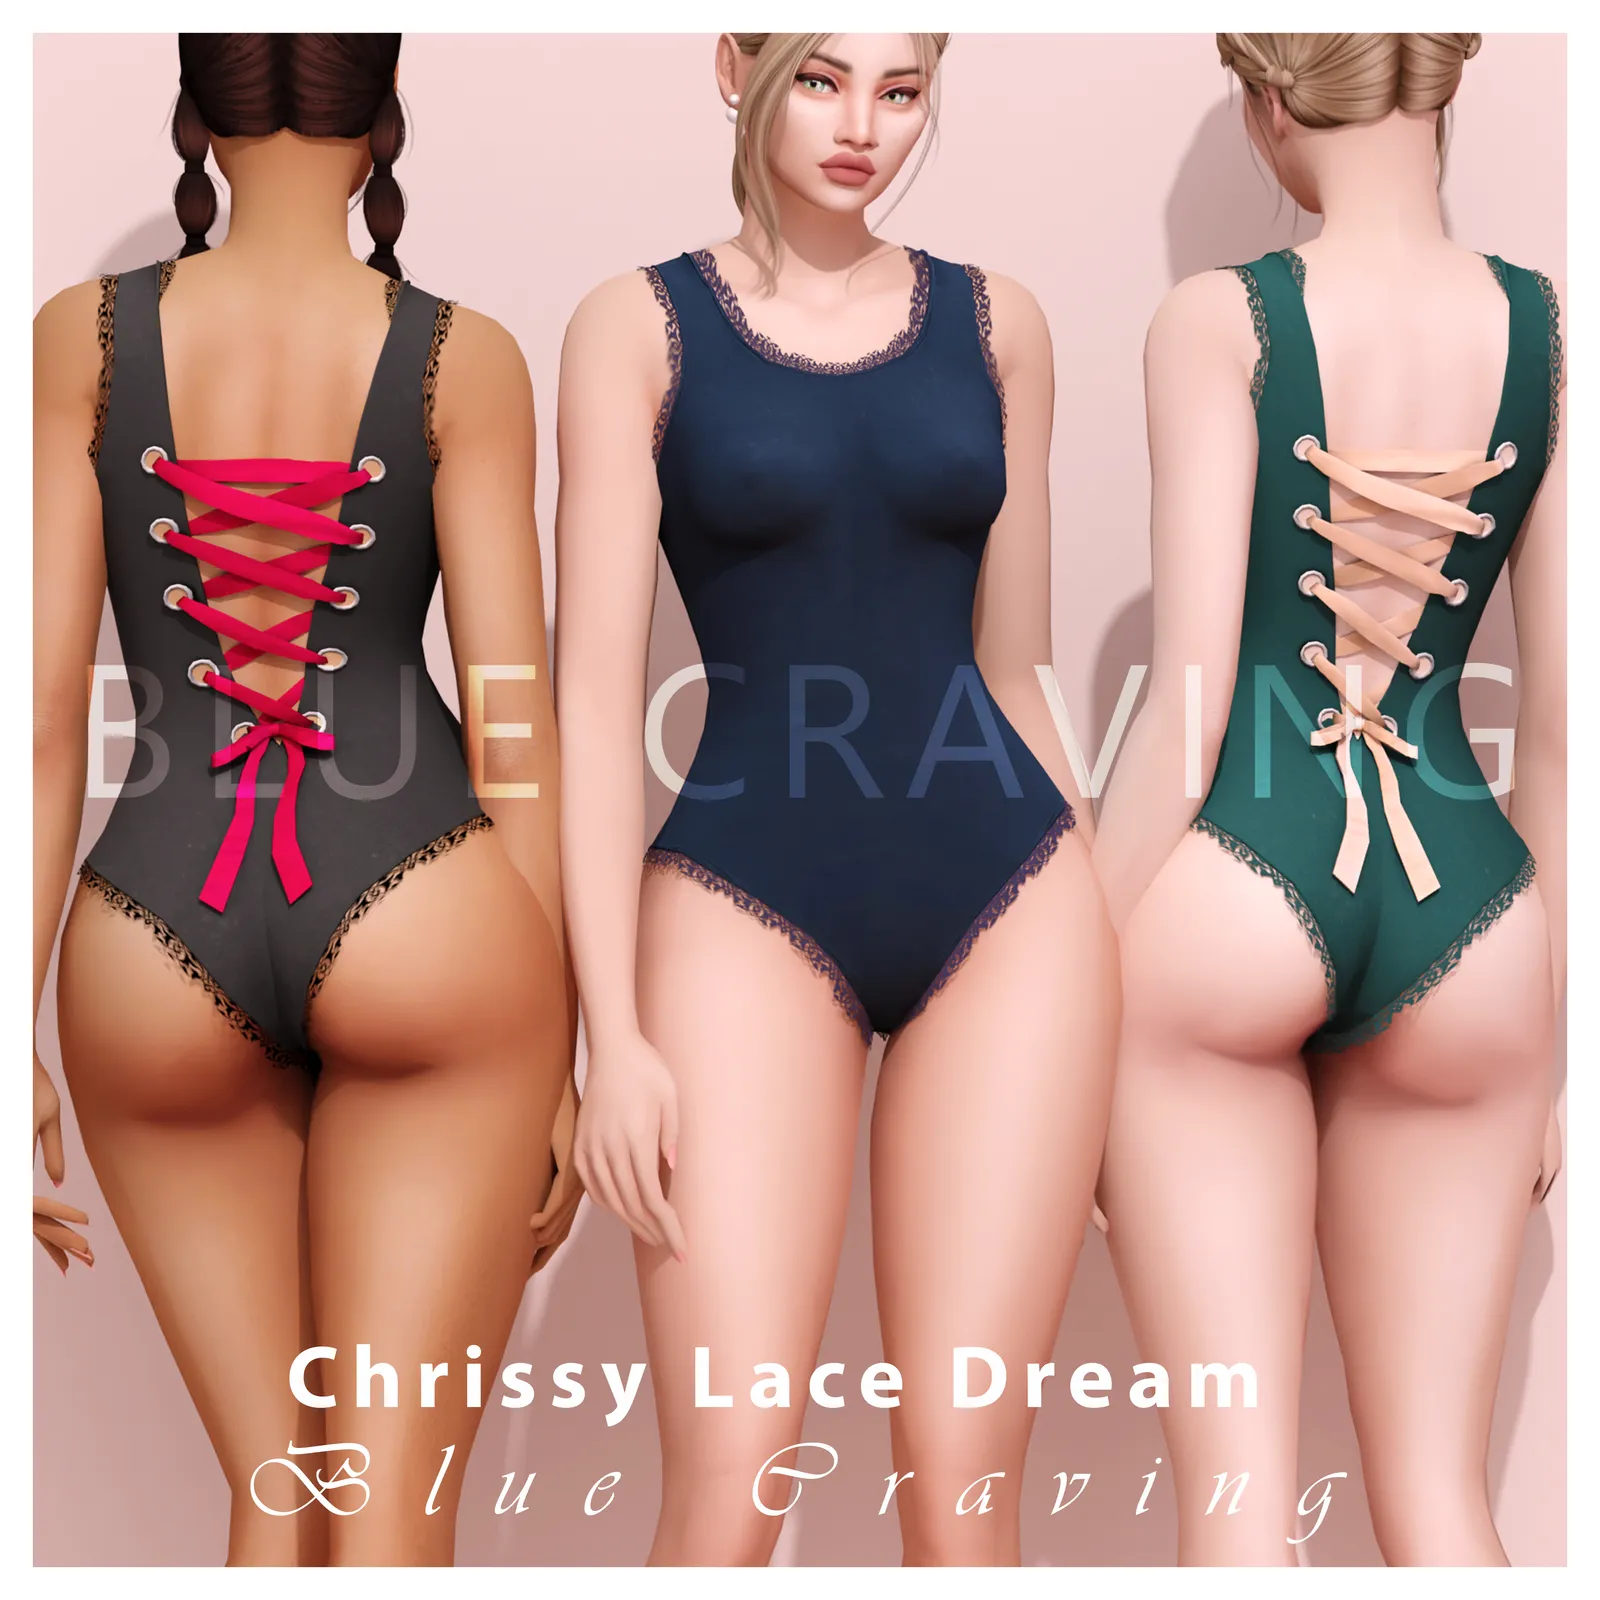 Chrissy Lace Dream